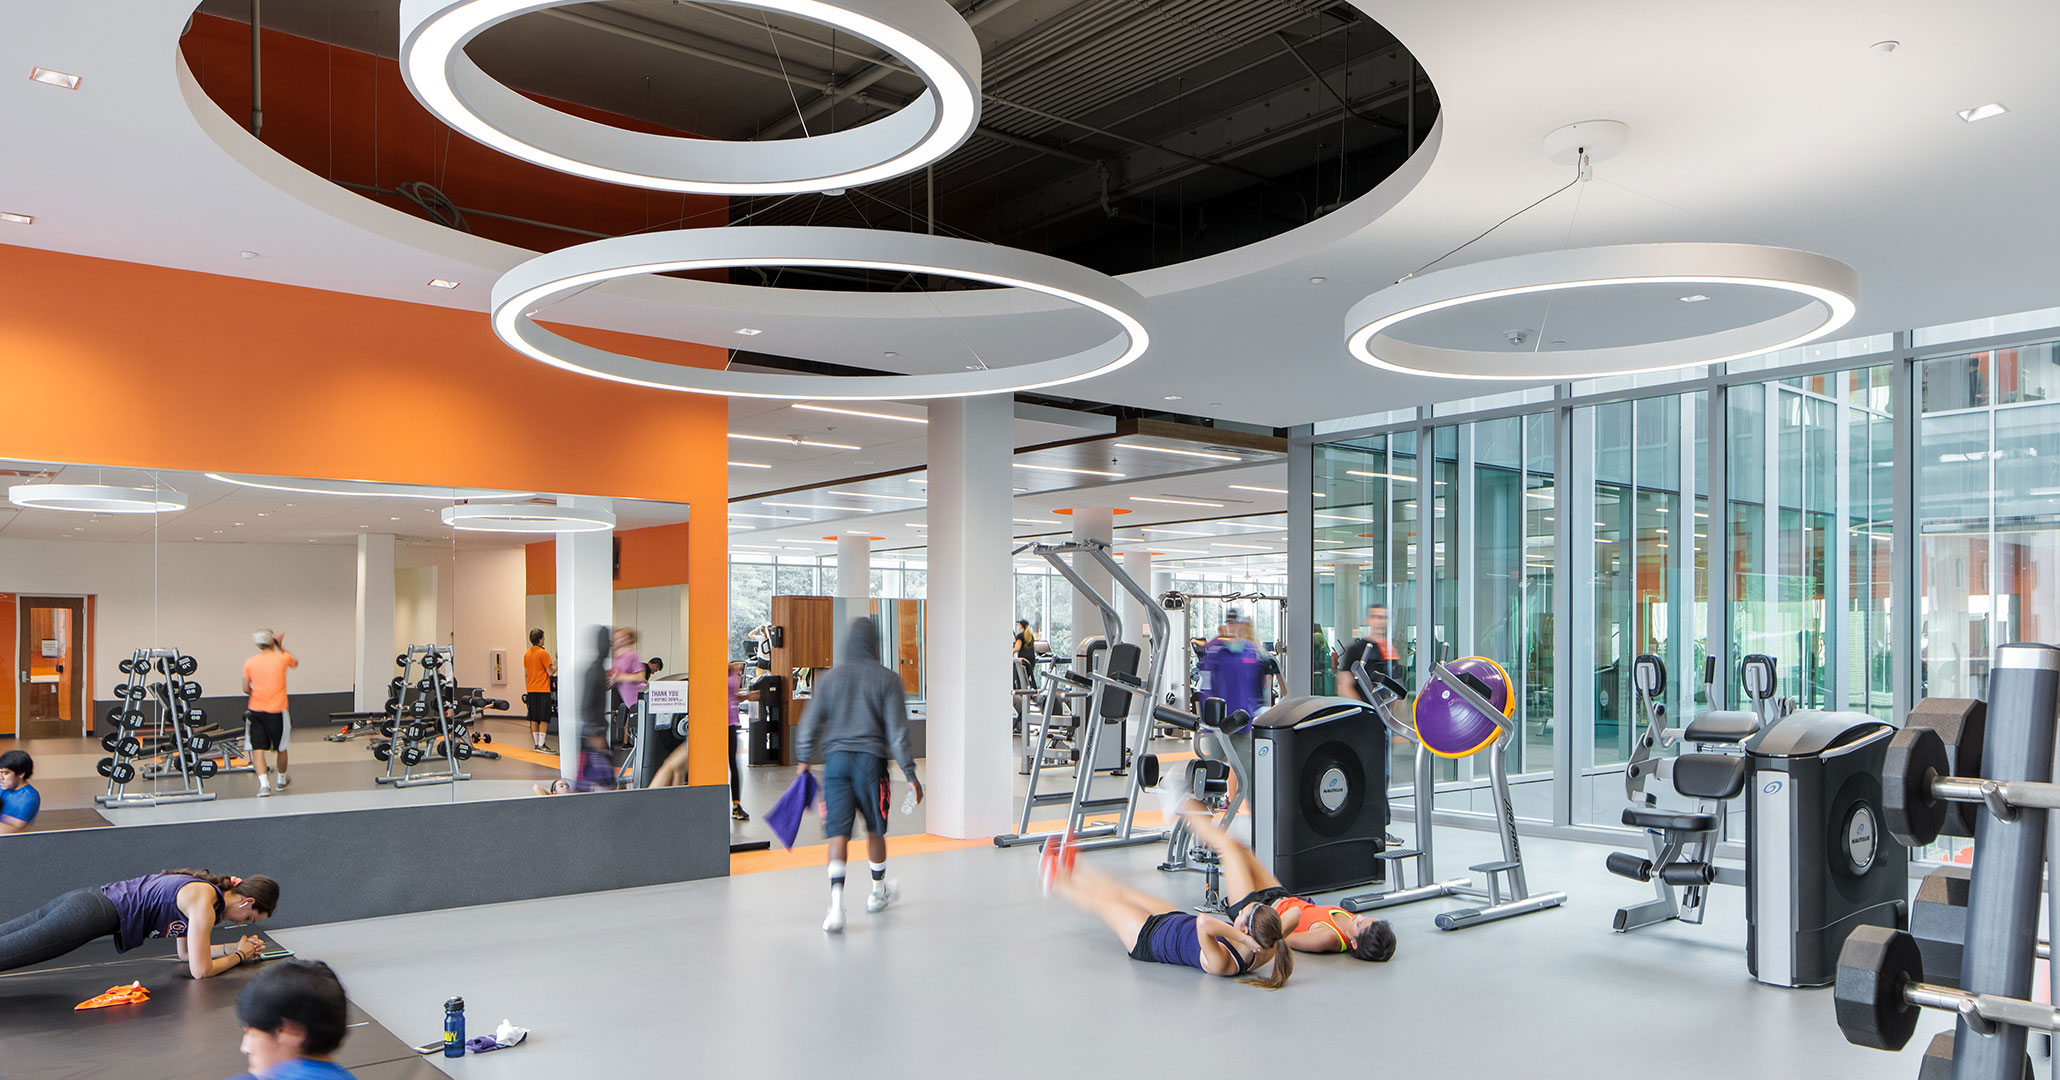 Clemson University worked with Boudreaux architects to design the gym at Douthit Hills Student Hub.